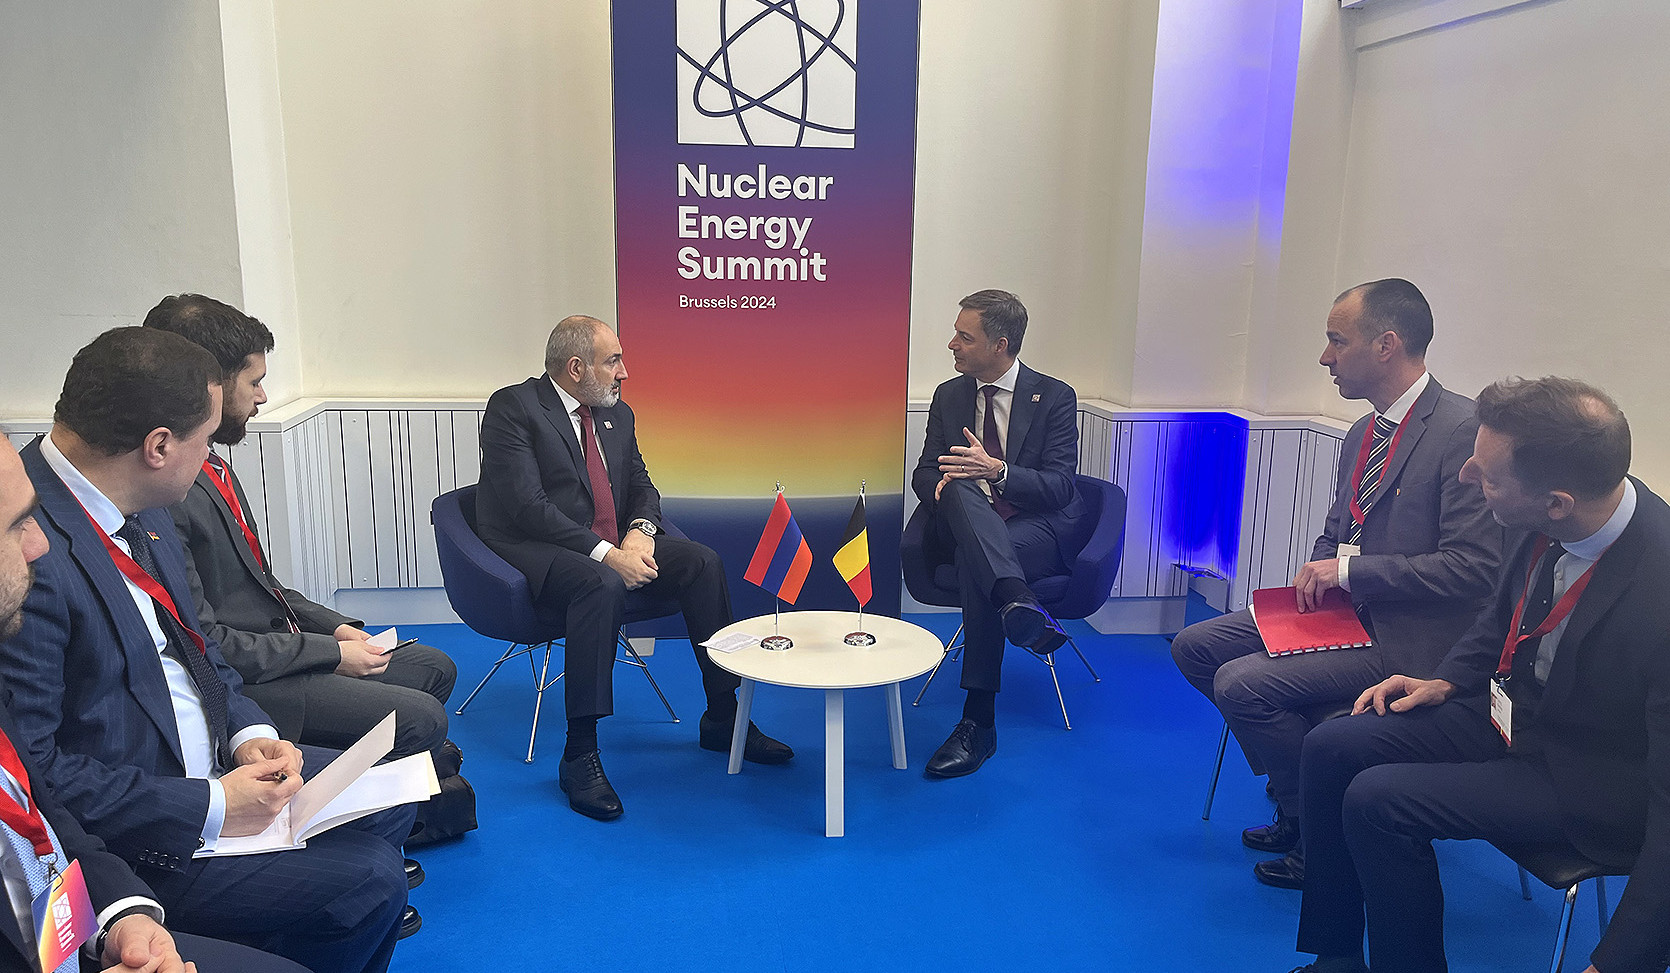 Prime Ministers of Armenia and Belgium meet within the framework of the Nuclear Energy Summit